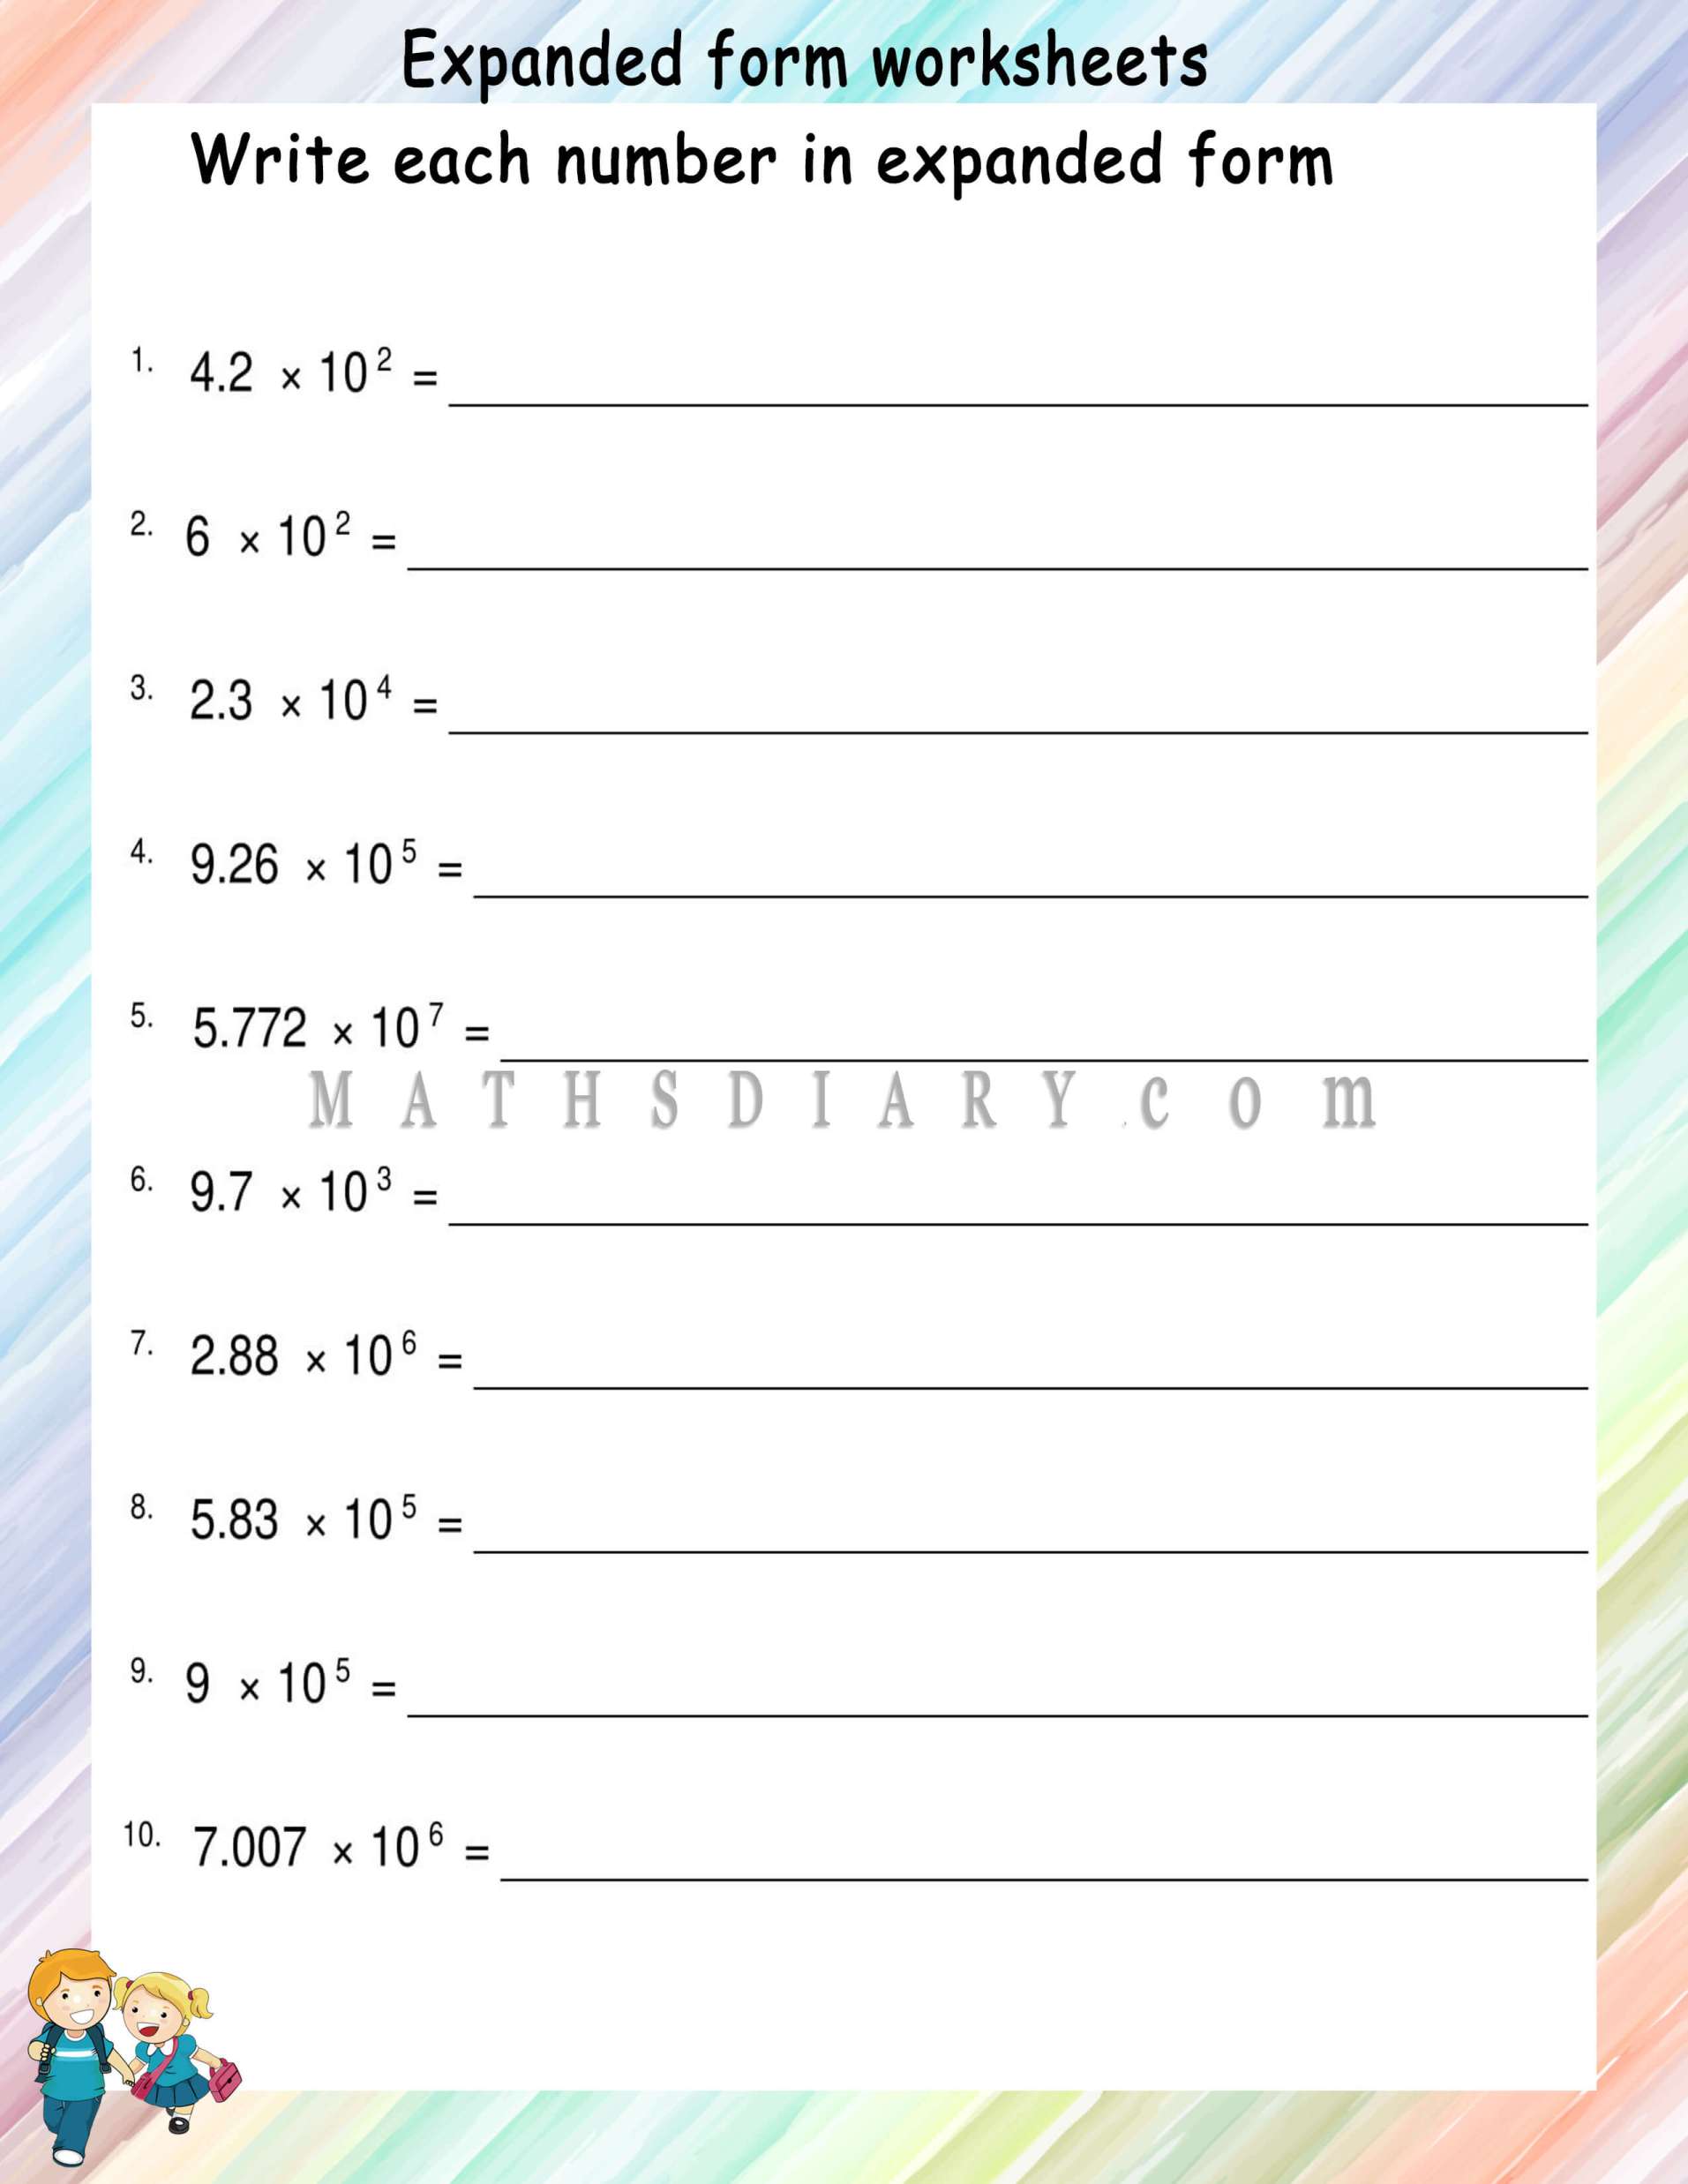 scientific-numbers-in-expanded-form-math-worksheets-mathsdiary